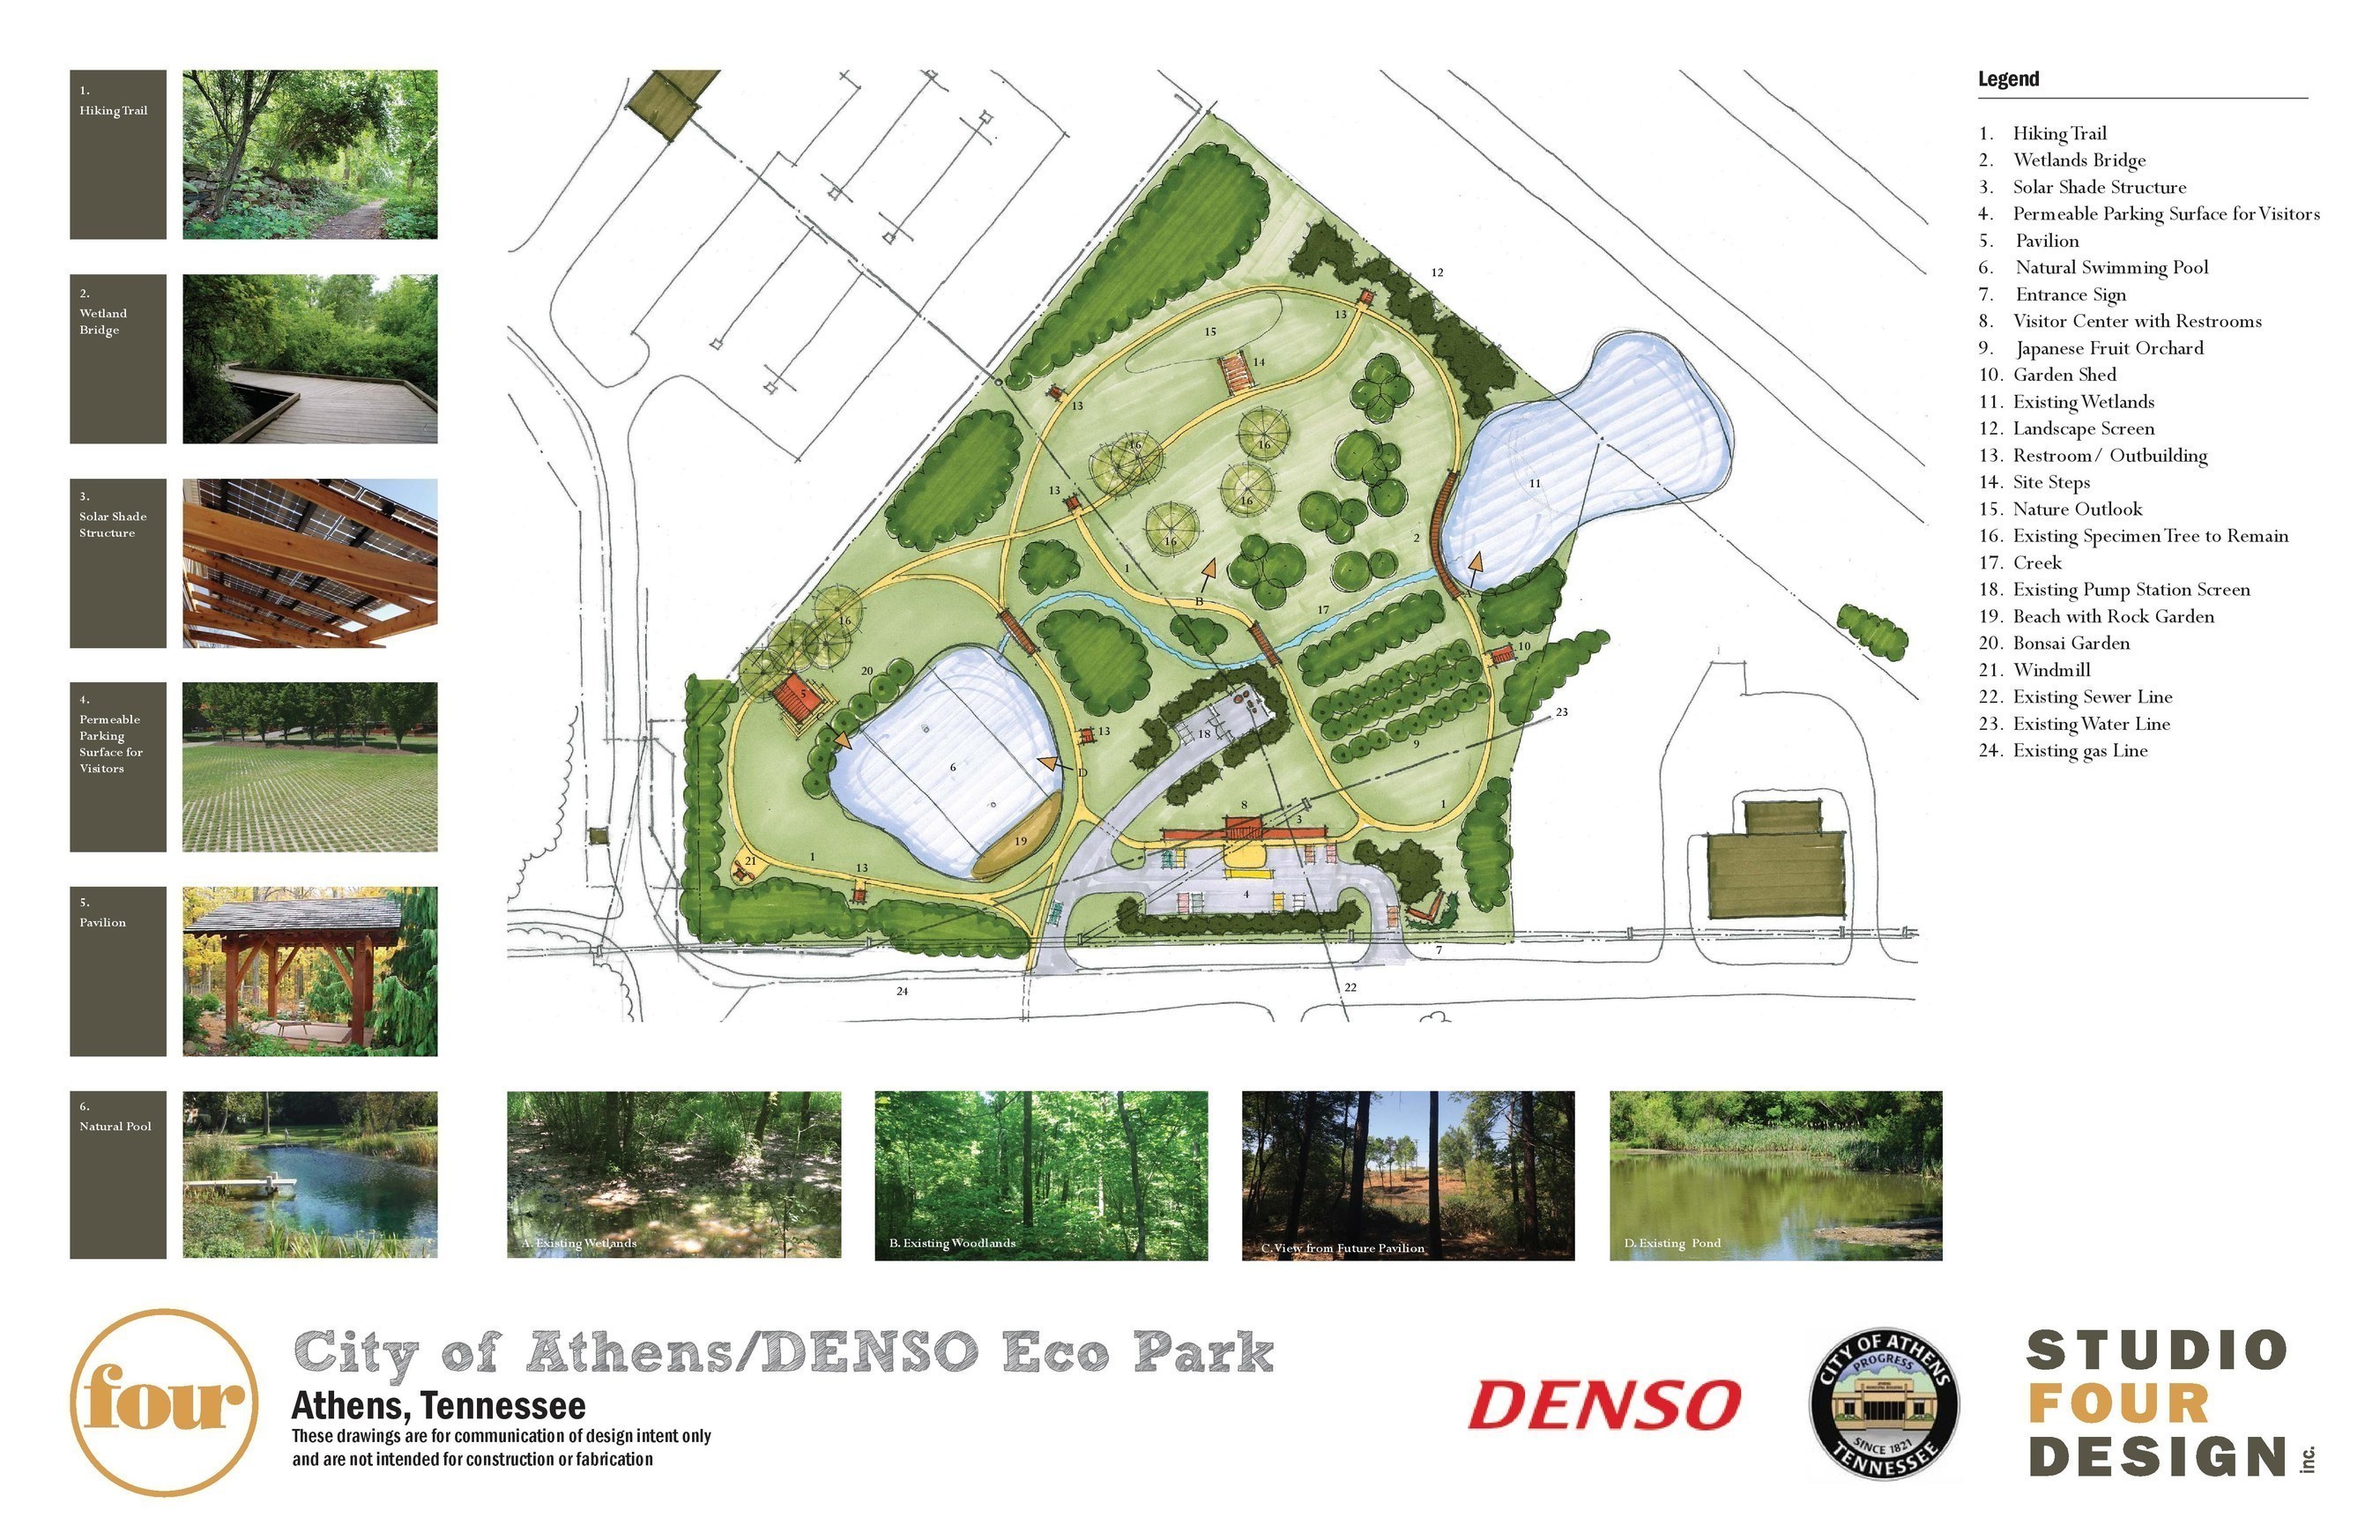 Studio Four Design brings the sustainable, Japanese-inspired eco-park vision of DENSO Manufacturing Athens Tennessee to life.